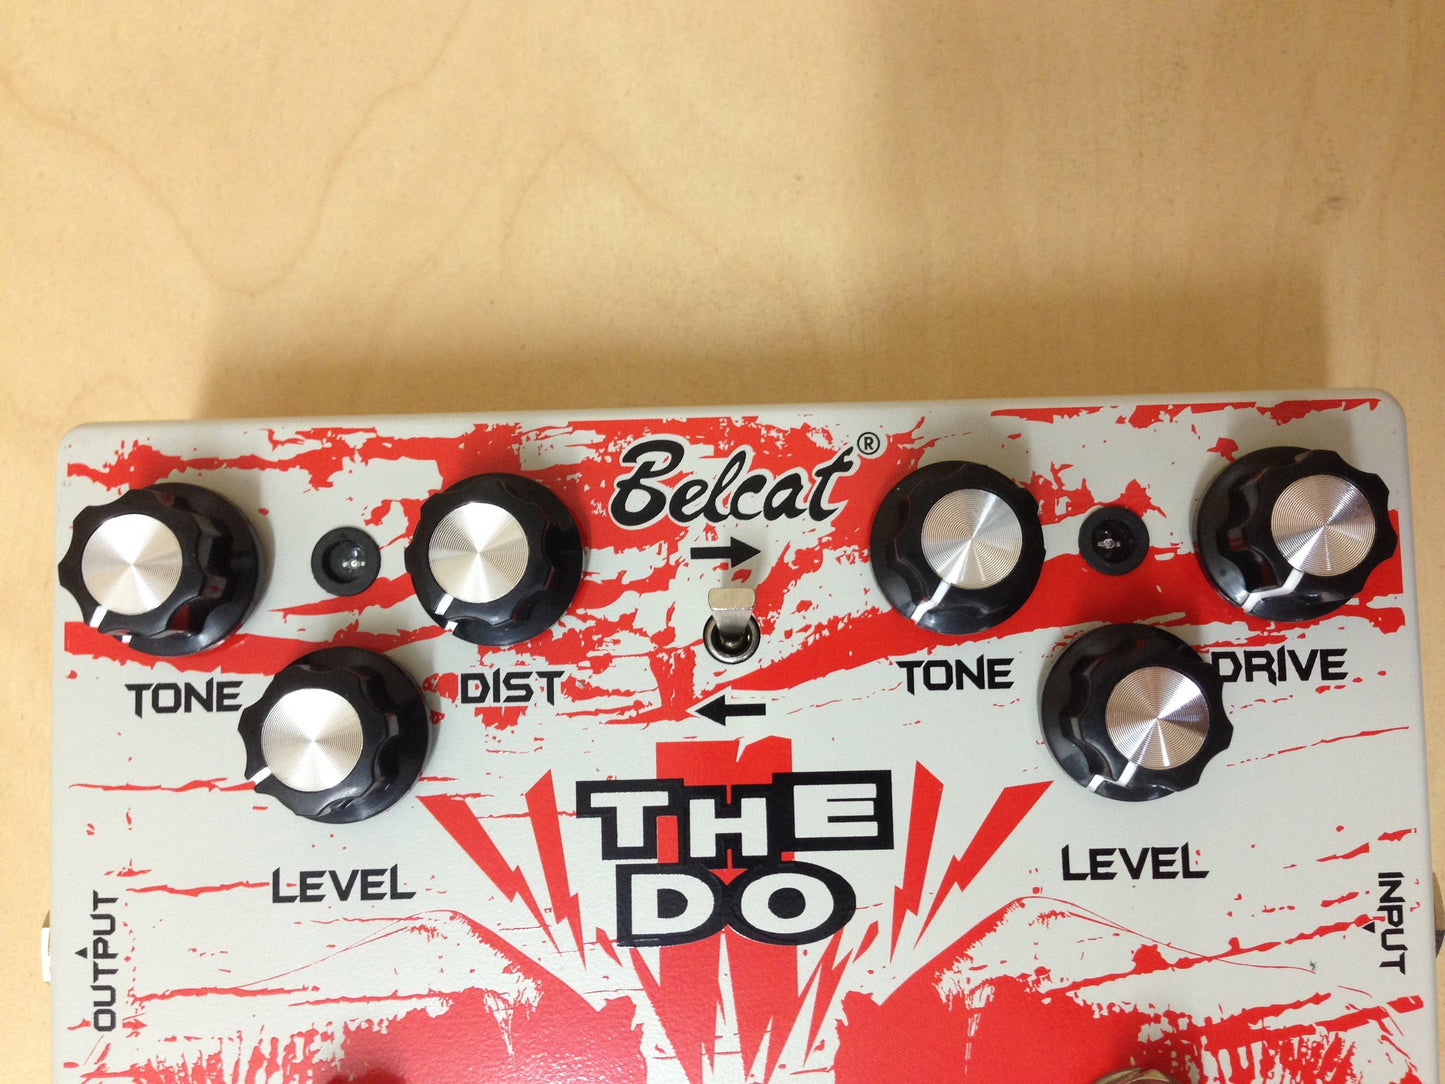 Belcat "THE DO" Dual Overdrive & Distortion Effects Pedal